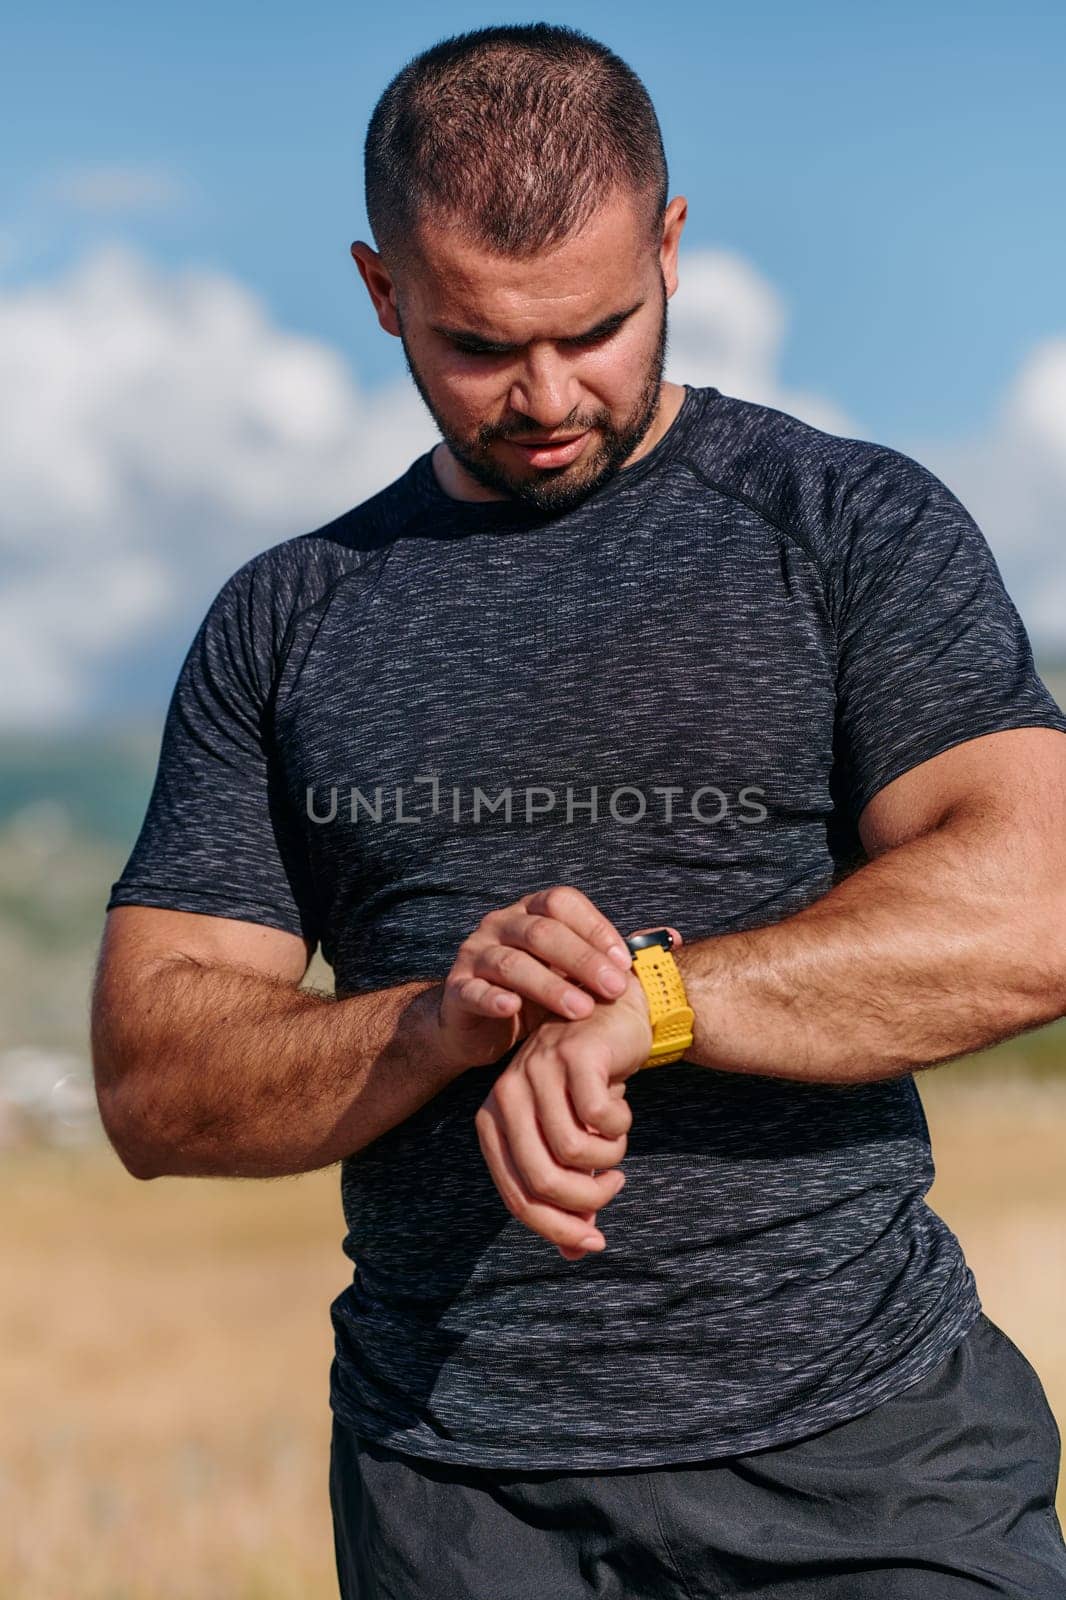 An athletic man checks the results of his run on a smartwatch, leveraging technology to monitor his performance and progress in his fitness journey